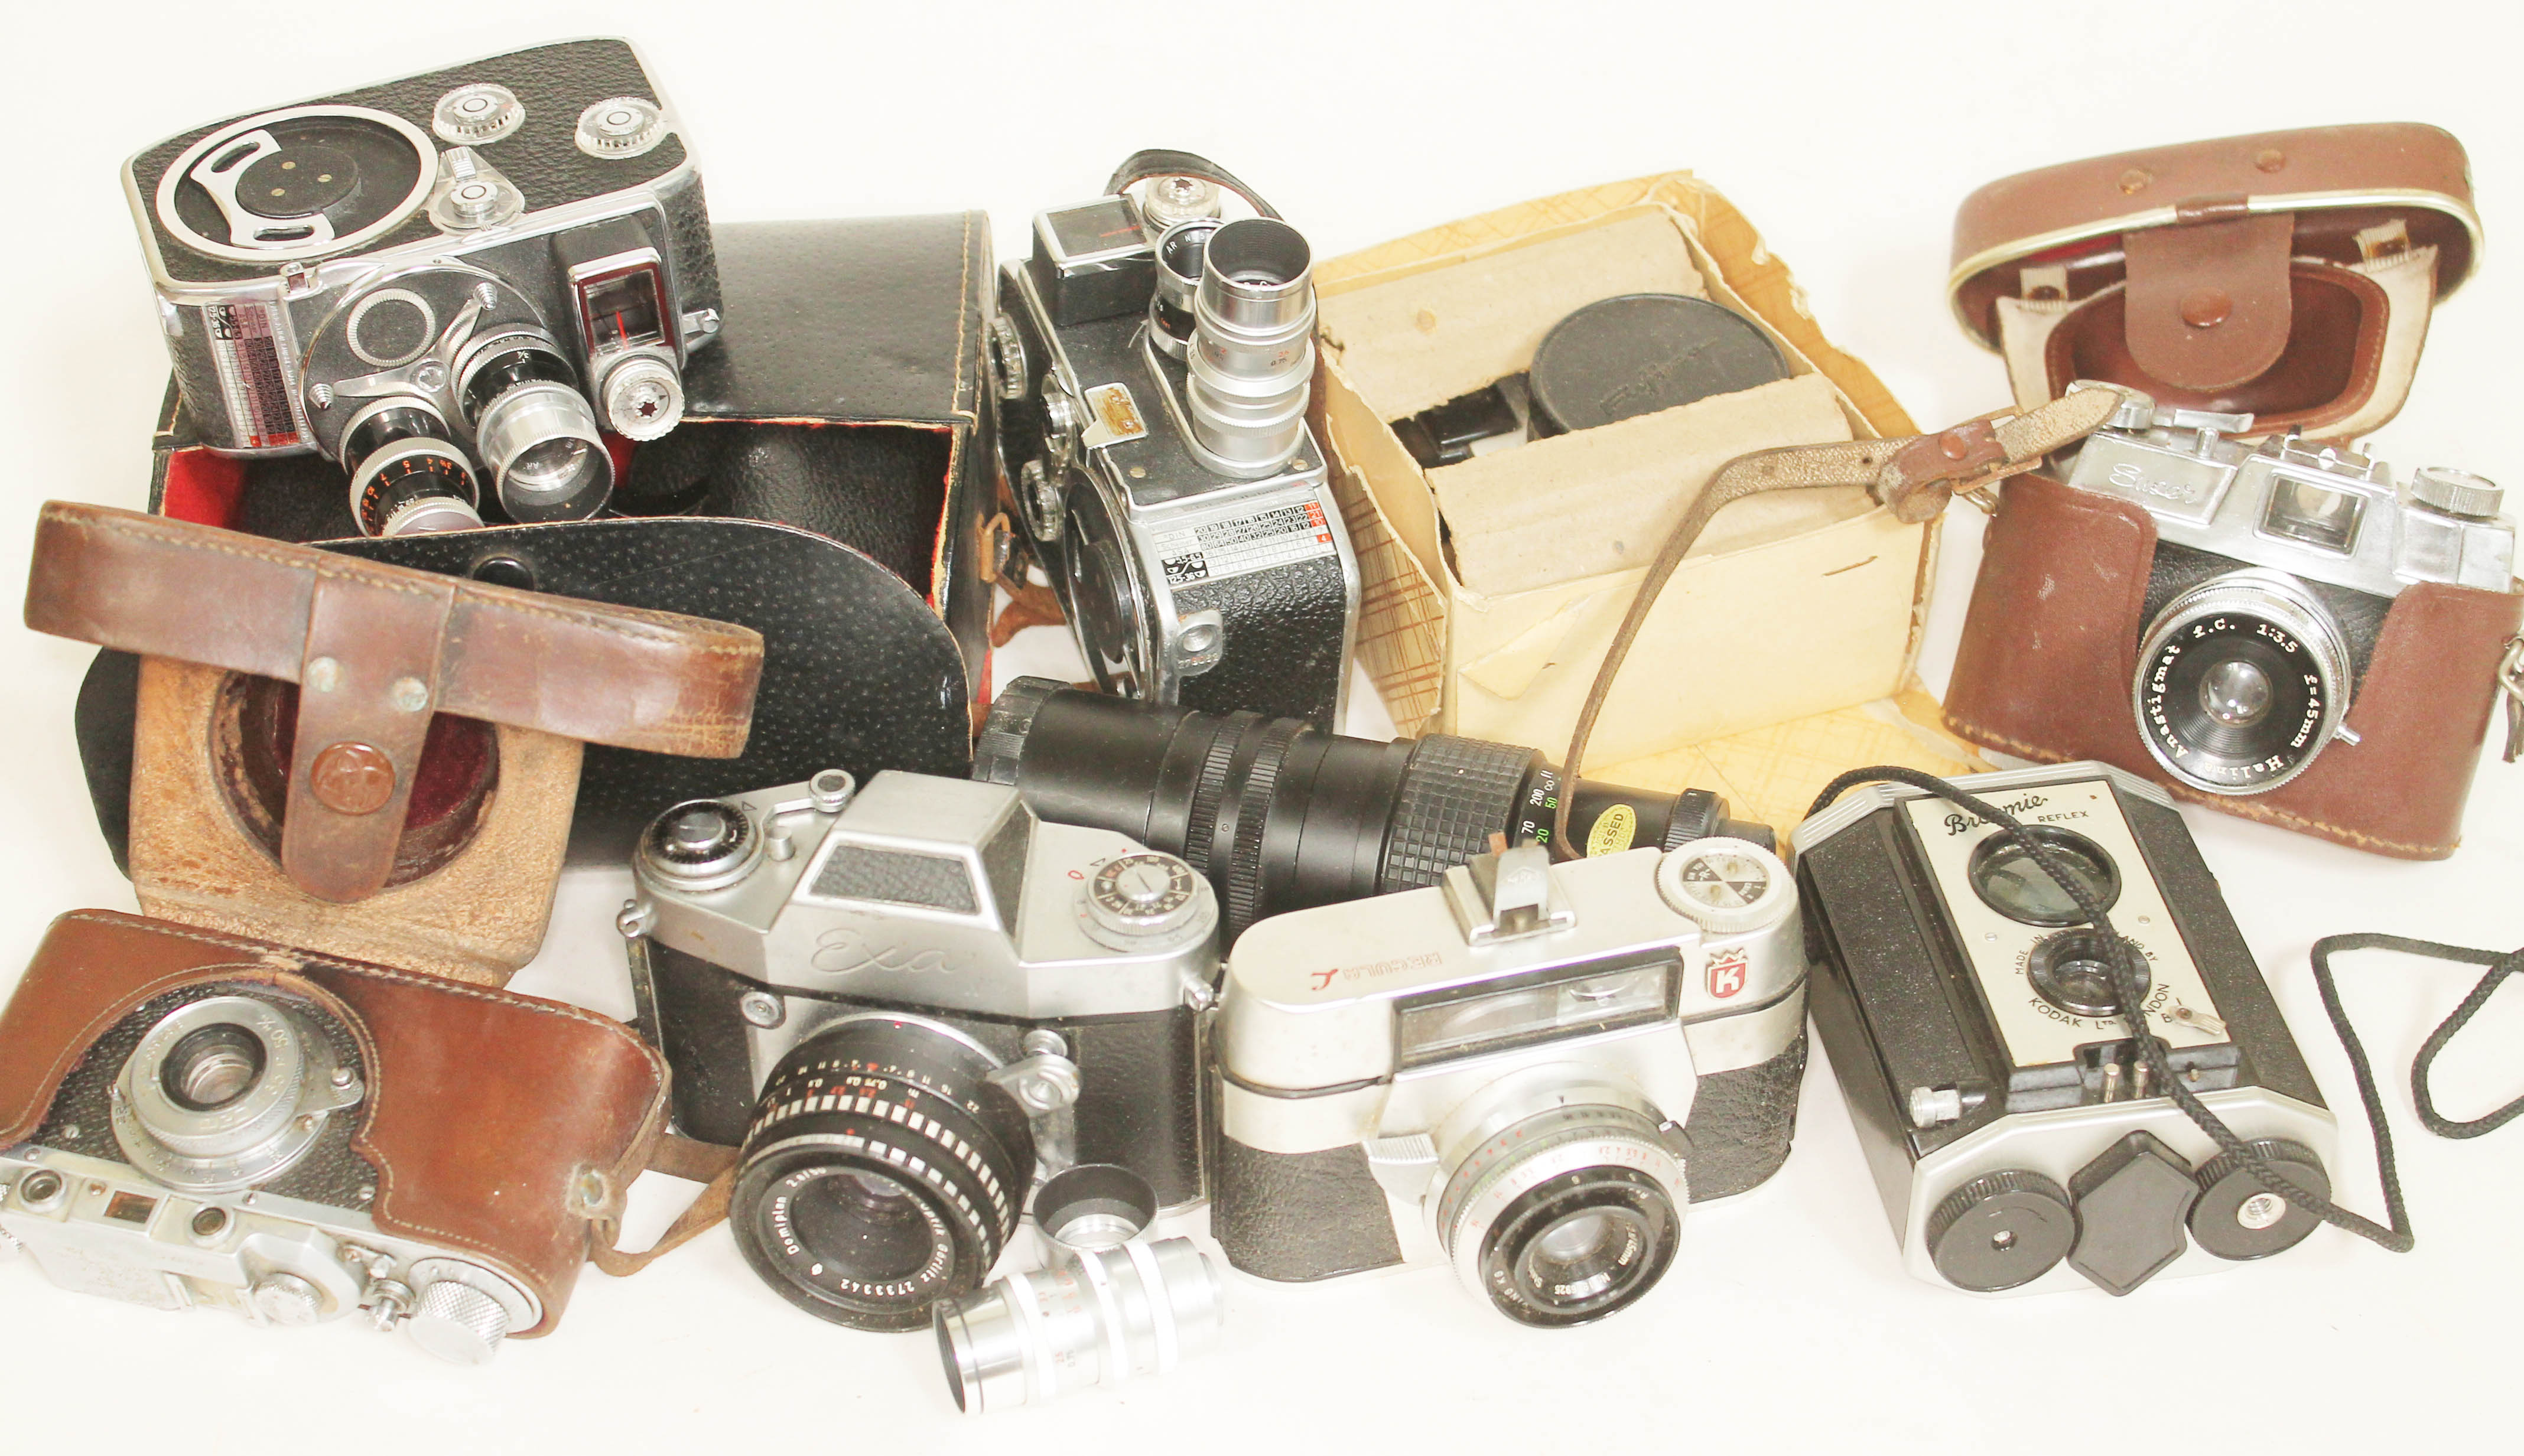 A box of cameras and accessories including a Thagee Dresden Exa II, two Bolex Paillard cameras and a